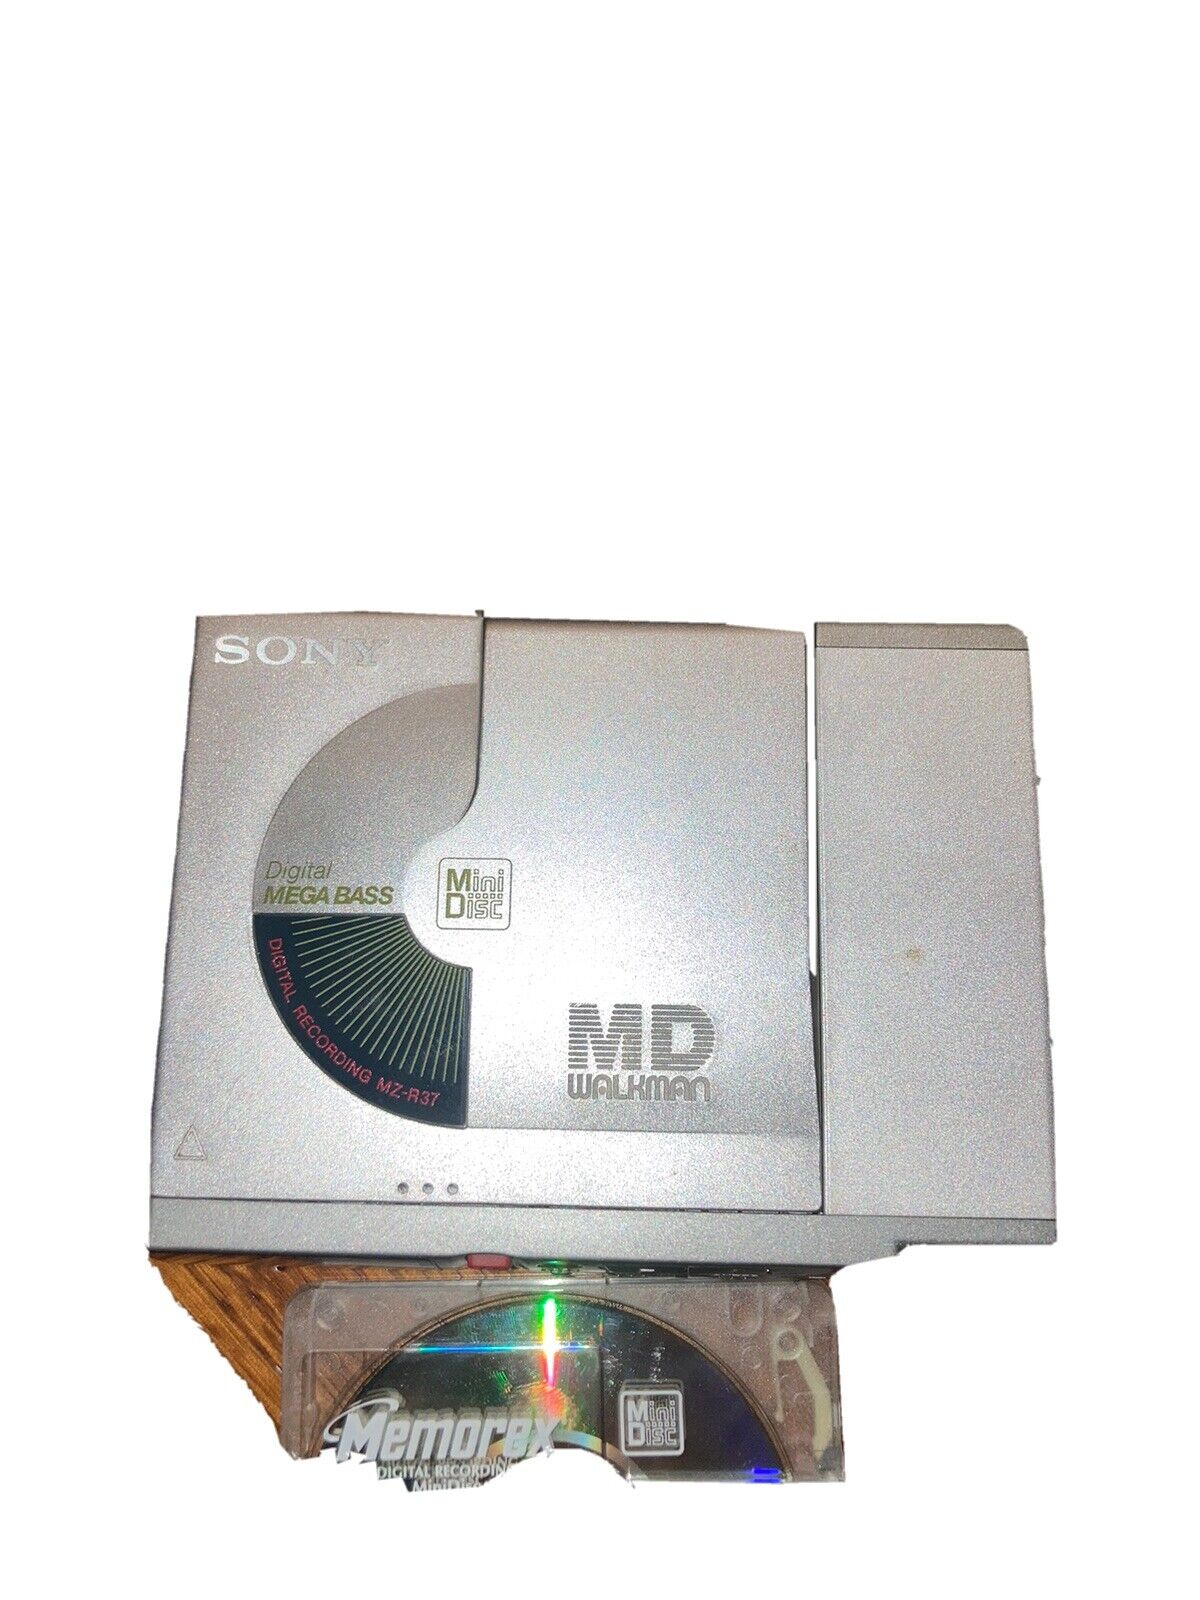 Sony Md Walkman Mz-r37 Portable Minidisc Player Recorder Working With Disc